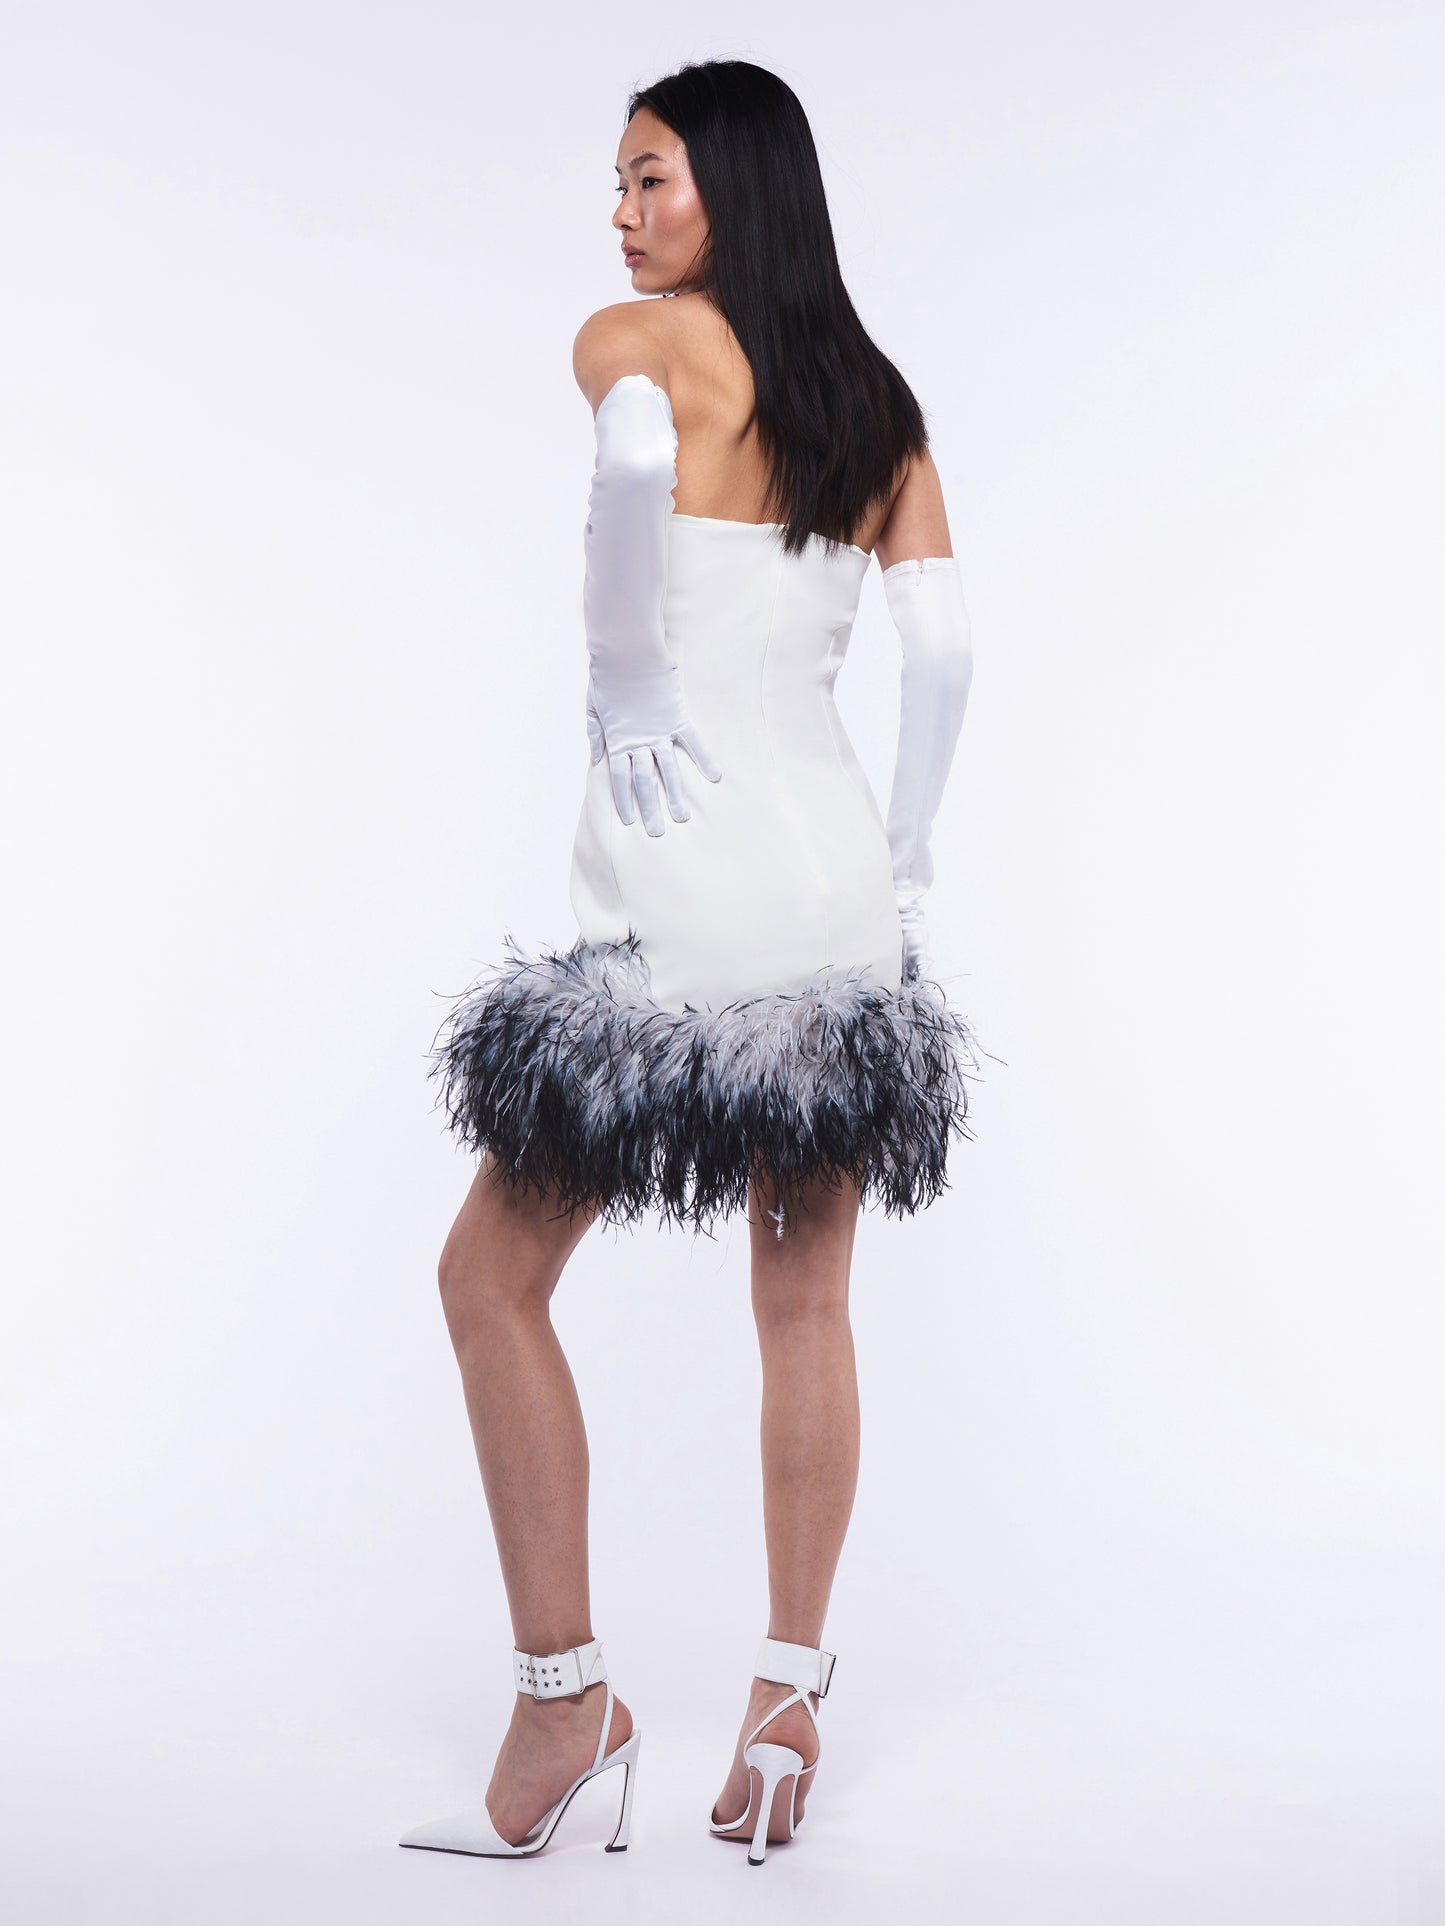 Cupid Dress & Gloves - Ivory / Ivory & Black Tip Feathers